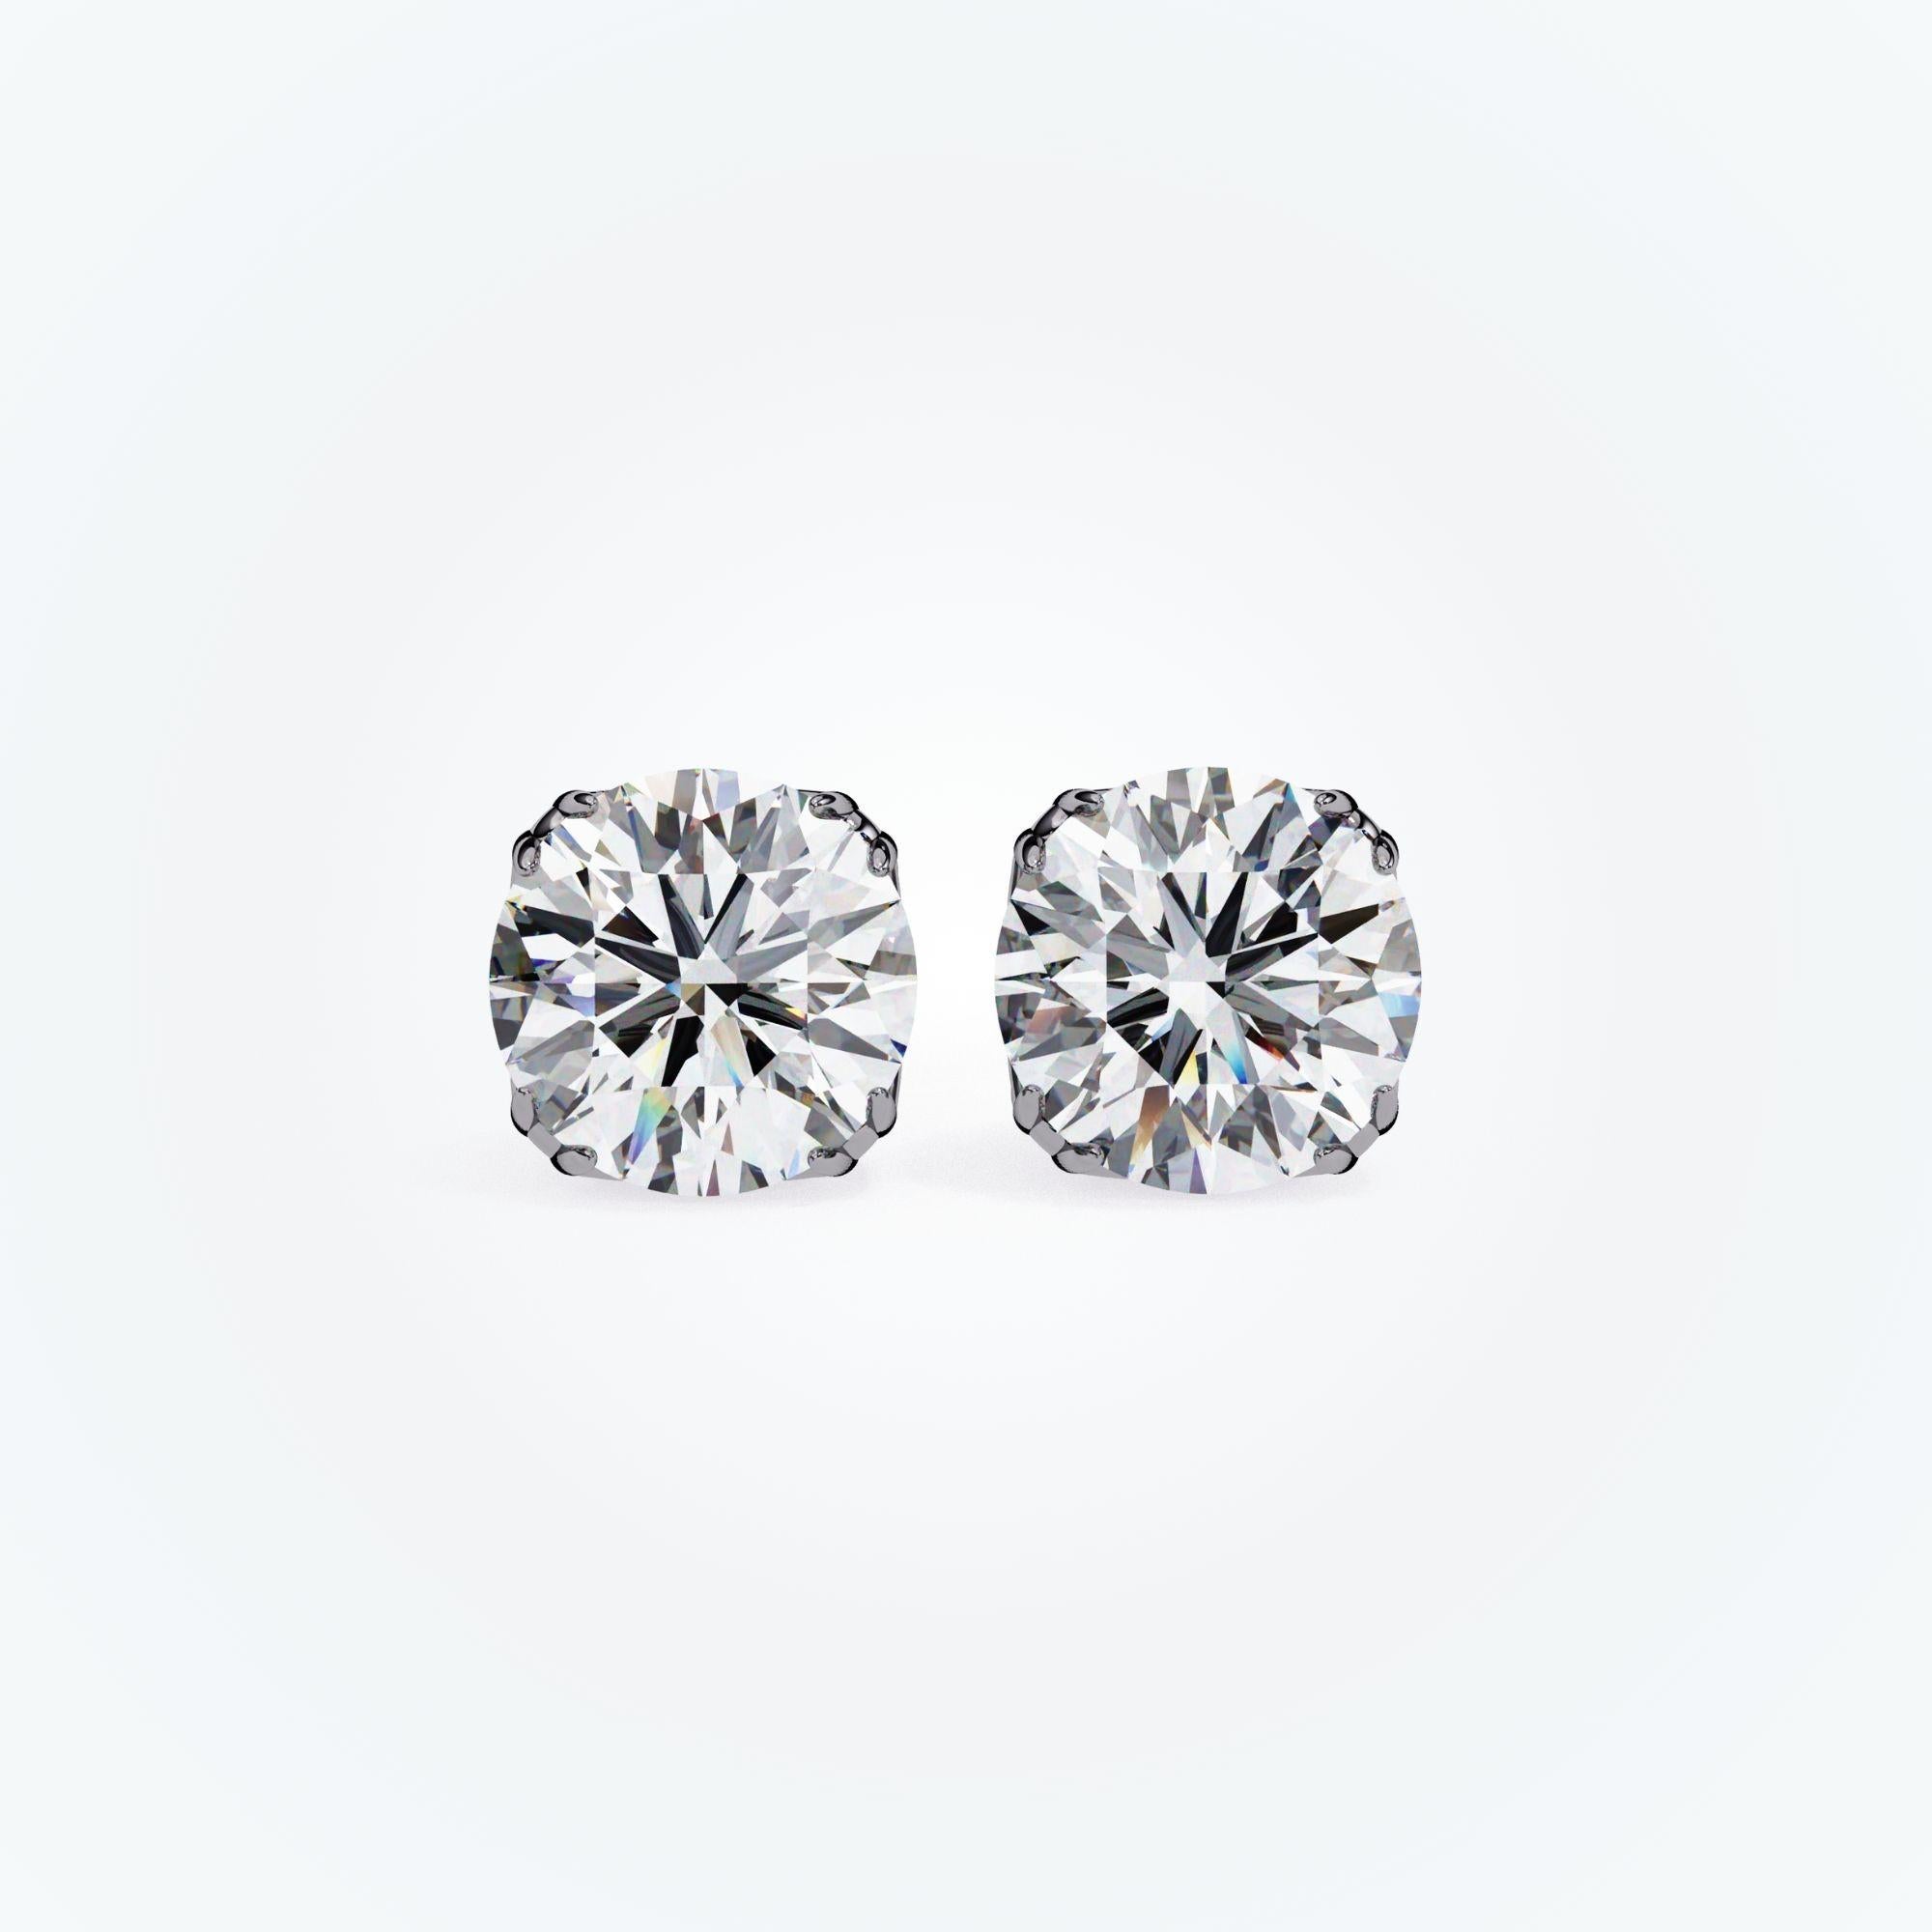 Natural Diamond Studs, Floral, 8 Prongs, 1/2 carat total weight, 14K Solid Gold For Sale 4